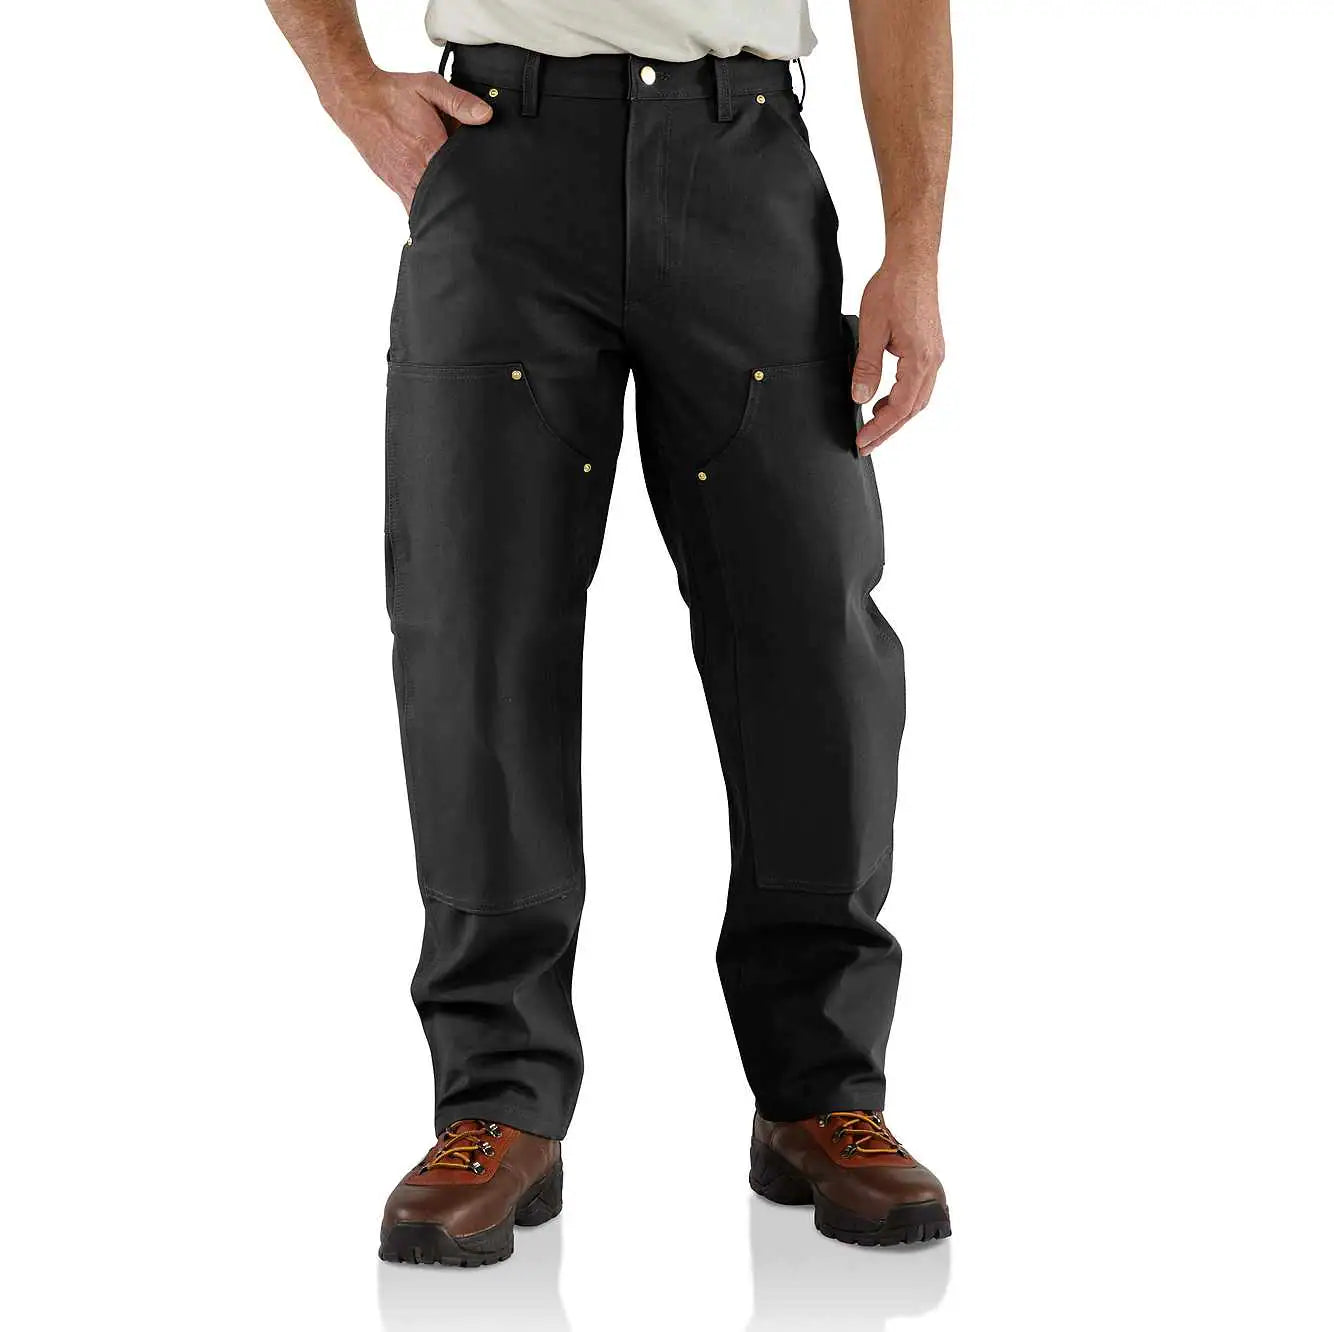 Carhartt Firm Duck Double Front Utility Work Pant B01